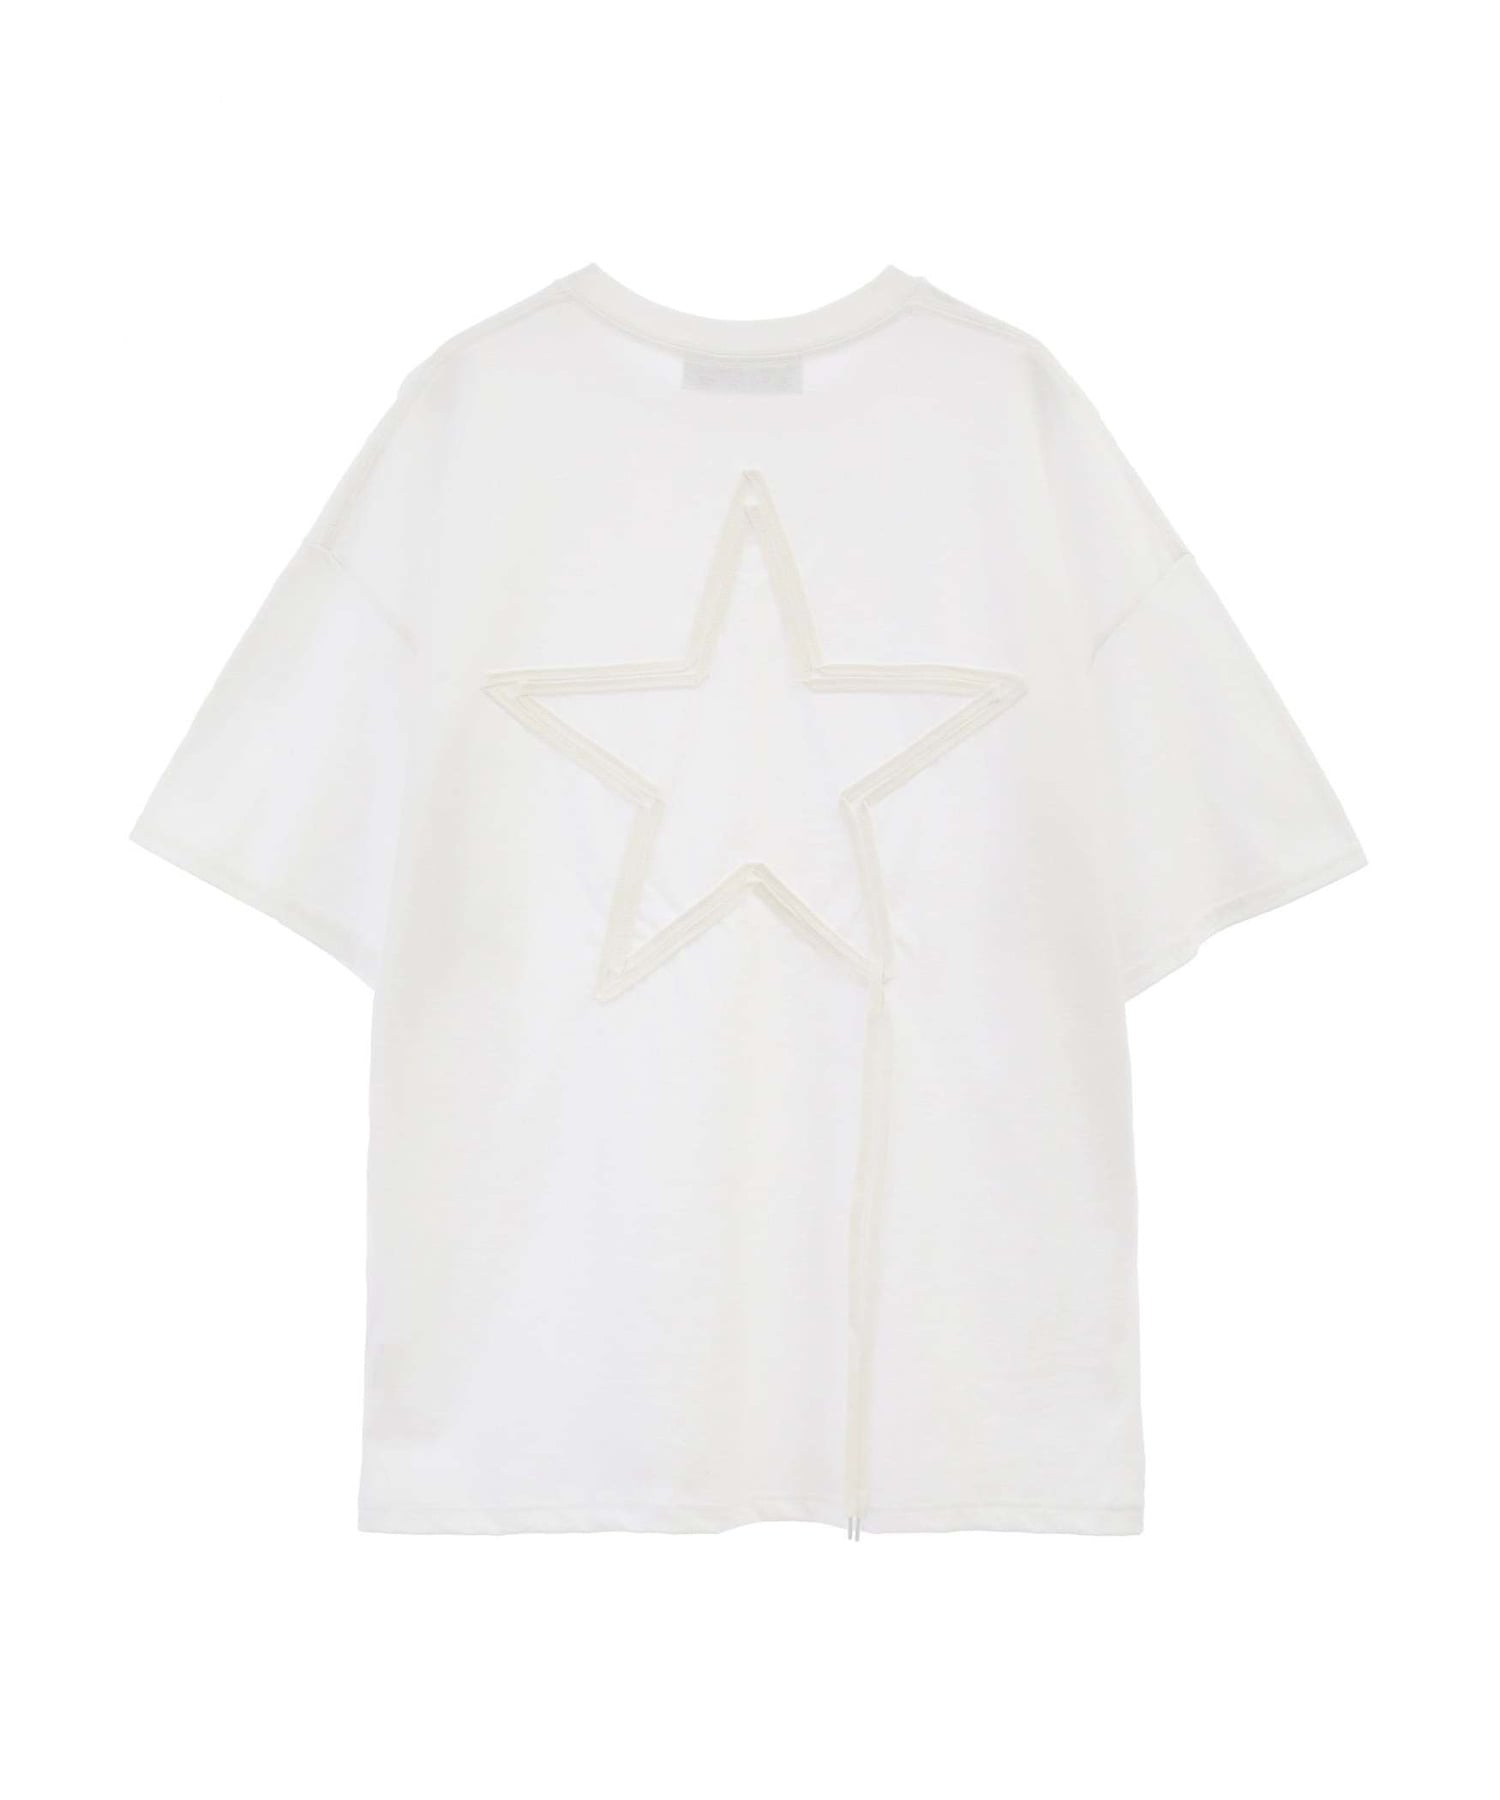 SPINDLE STAR★ DESIGN TEE